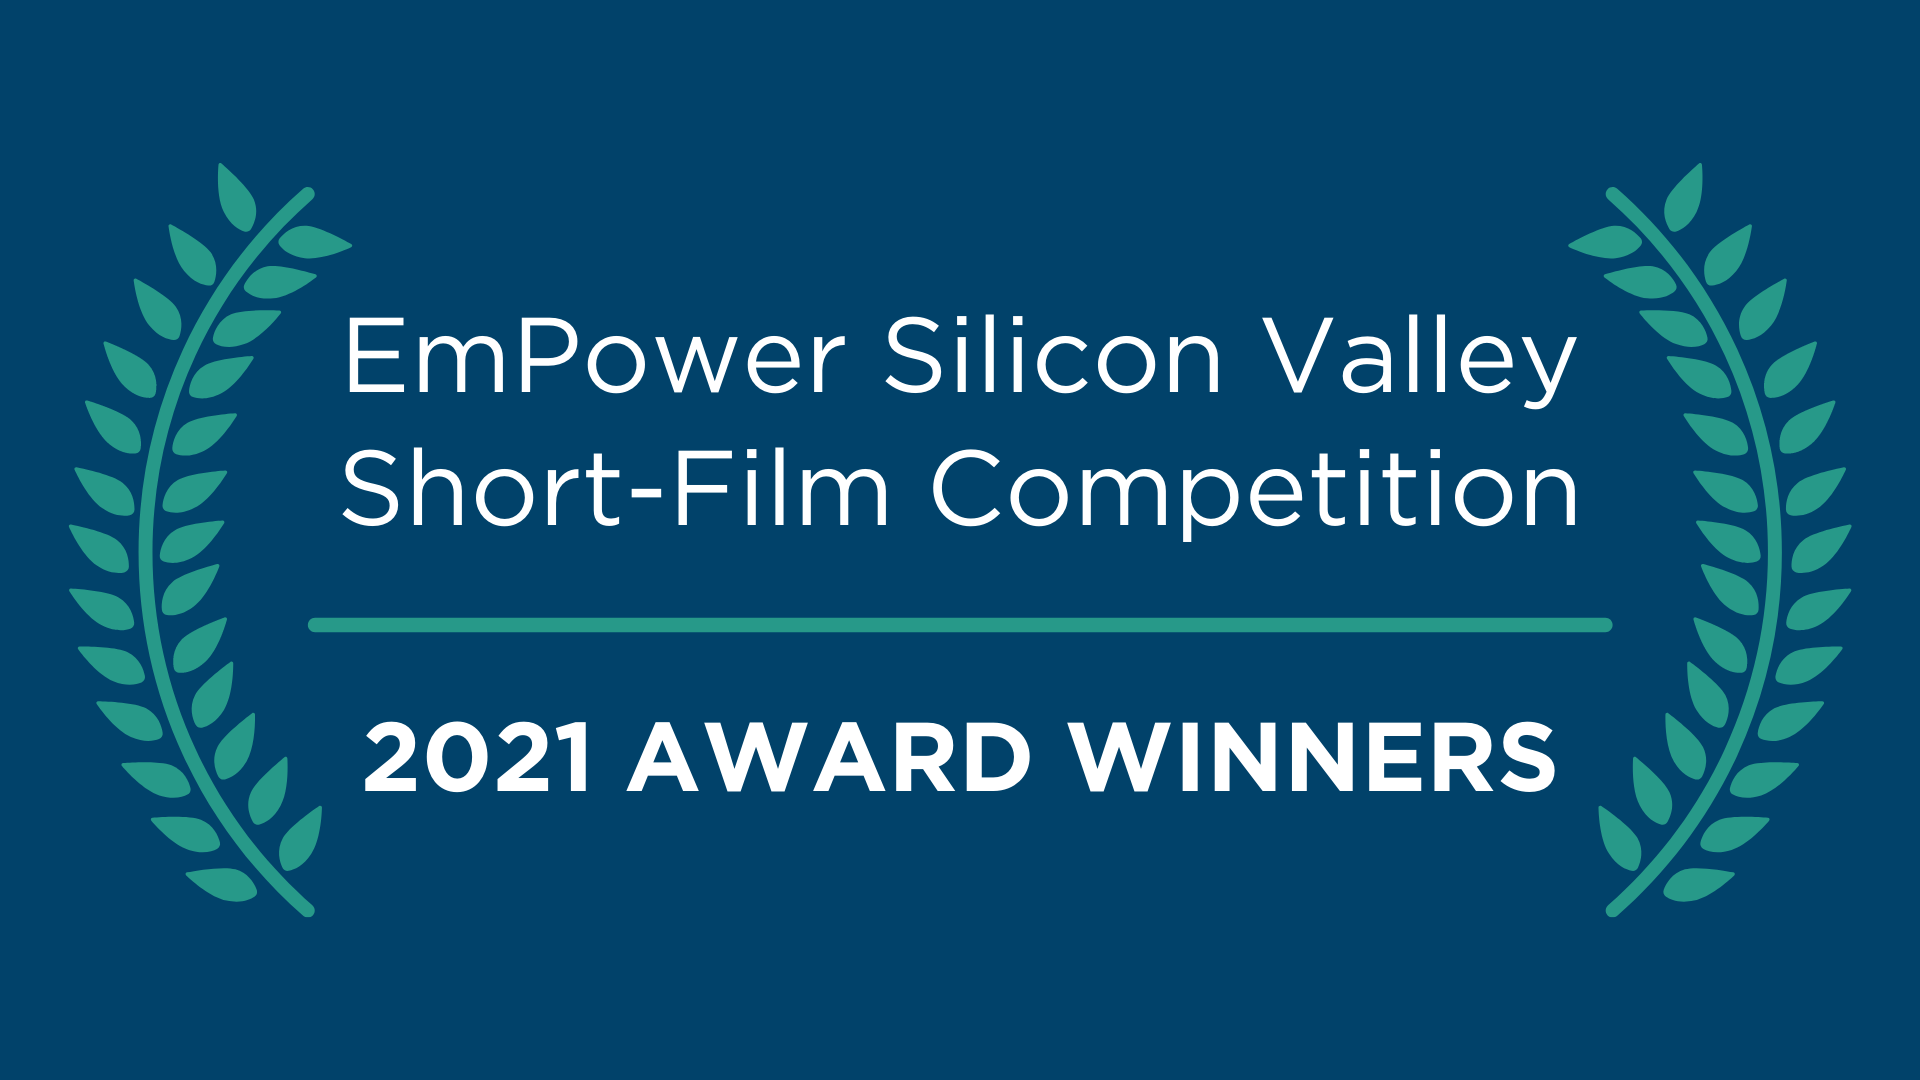 EmPower Silicon Valley Short-Film Competition - 2021 Award Winners